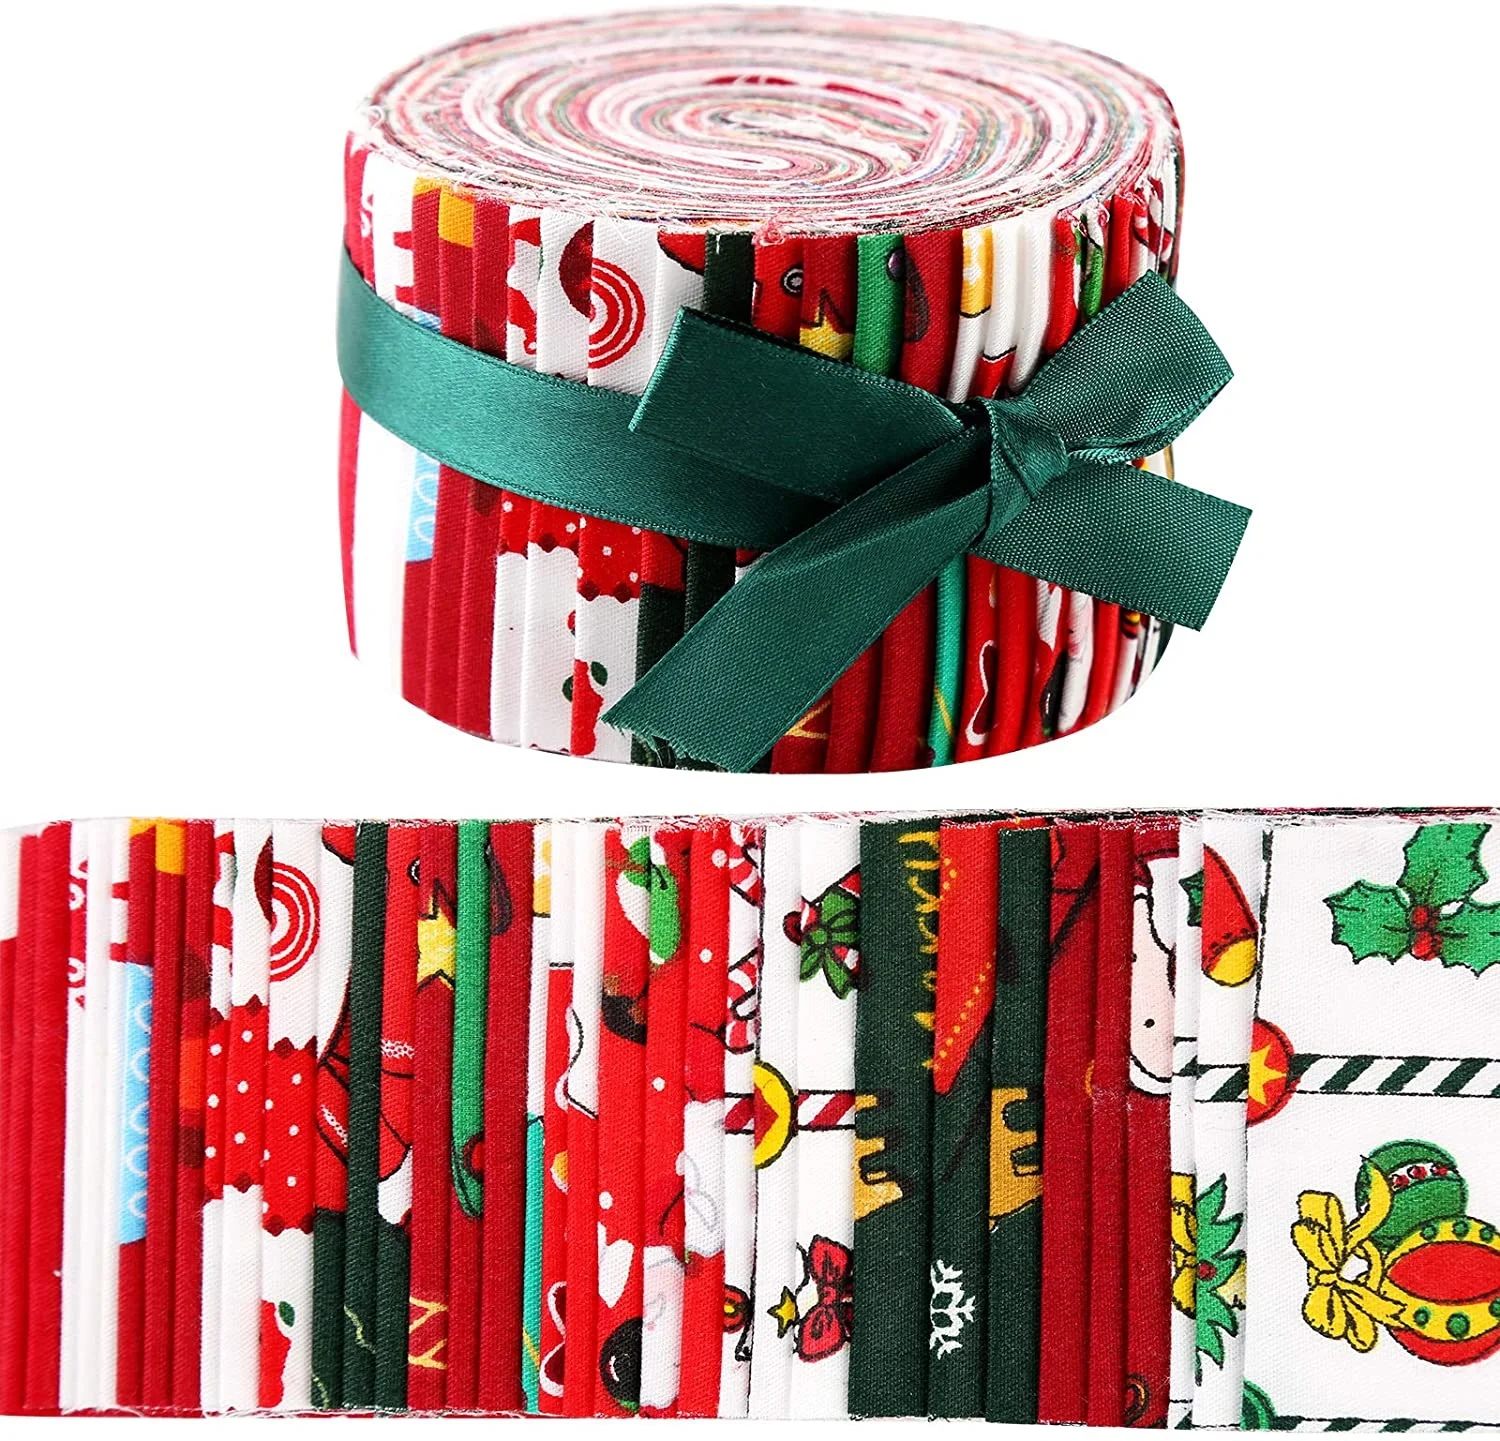 36pcs 6x100cm Jelly Roll Fabric Roll Up Cotton Sewing Fabric Quilting Strips For Christmas Patchwork Needlework Satin